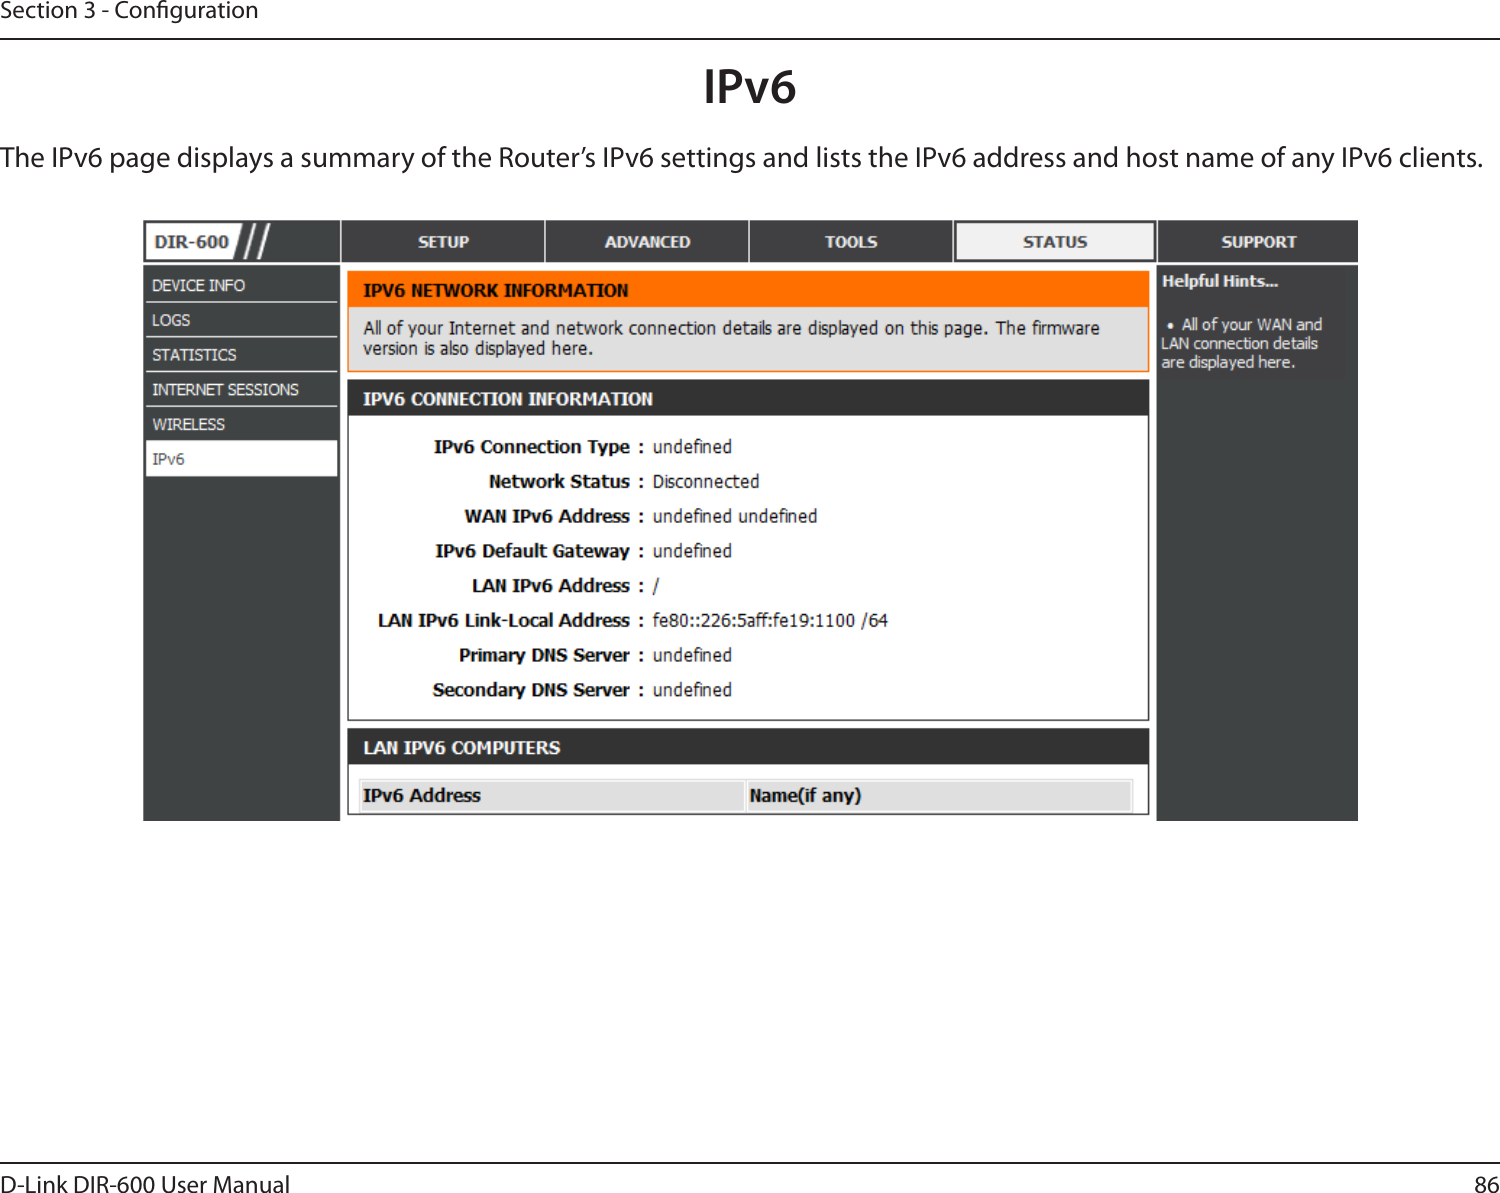 86D-Link DIR-600 User ManualSection 3 - CongurationIPv6The IPv6 page displays a summary of the Router’s IPv6 settings and lists the IPv6 address and host name of any IPv6 clients. 